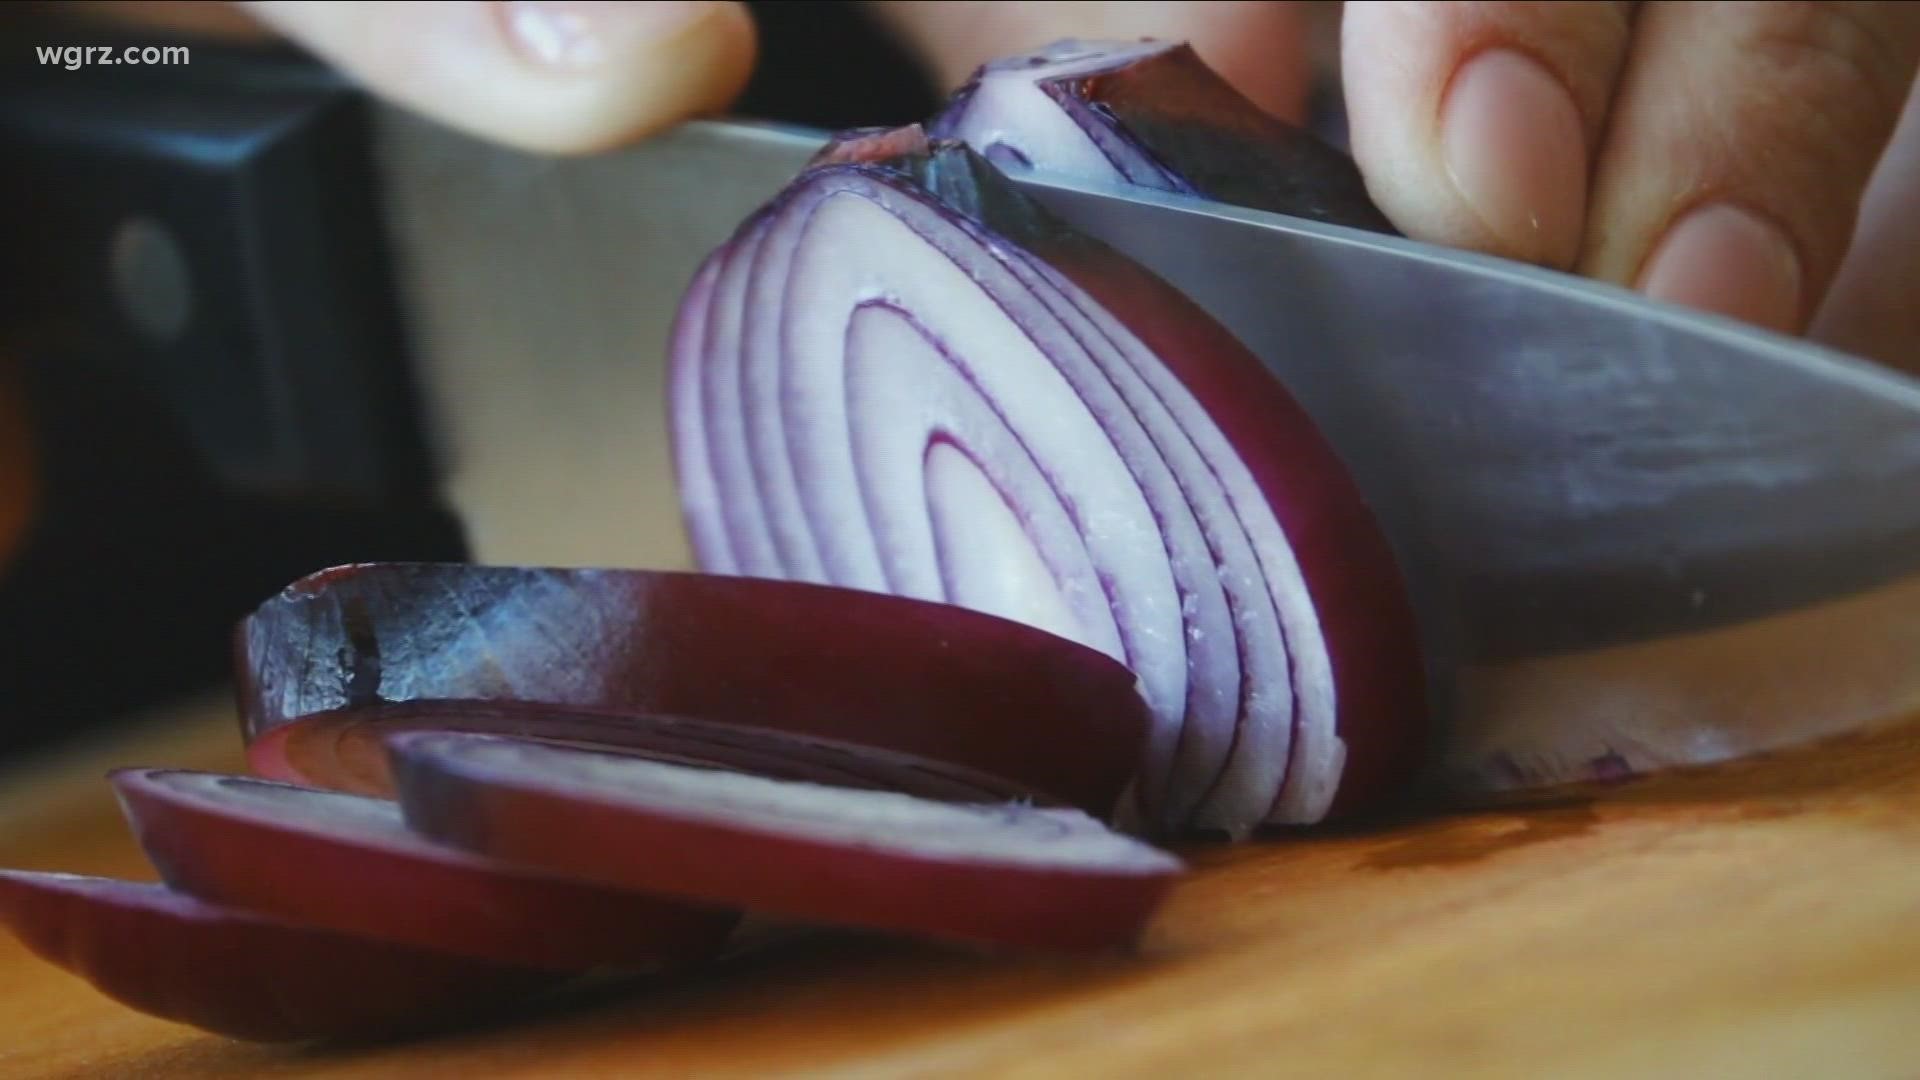 Salmonella outbreak linked to onions; some Western New York grocery stores say they aren't affected.